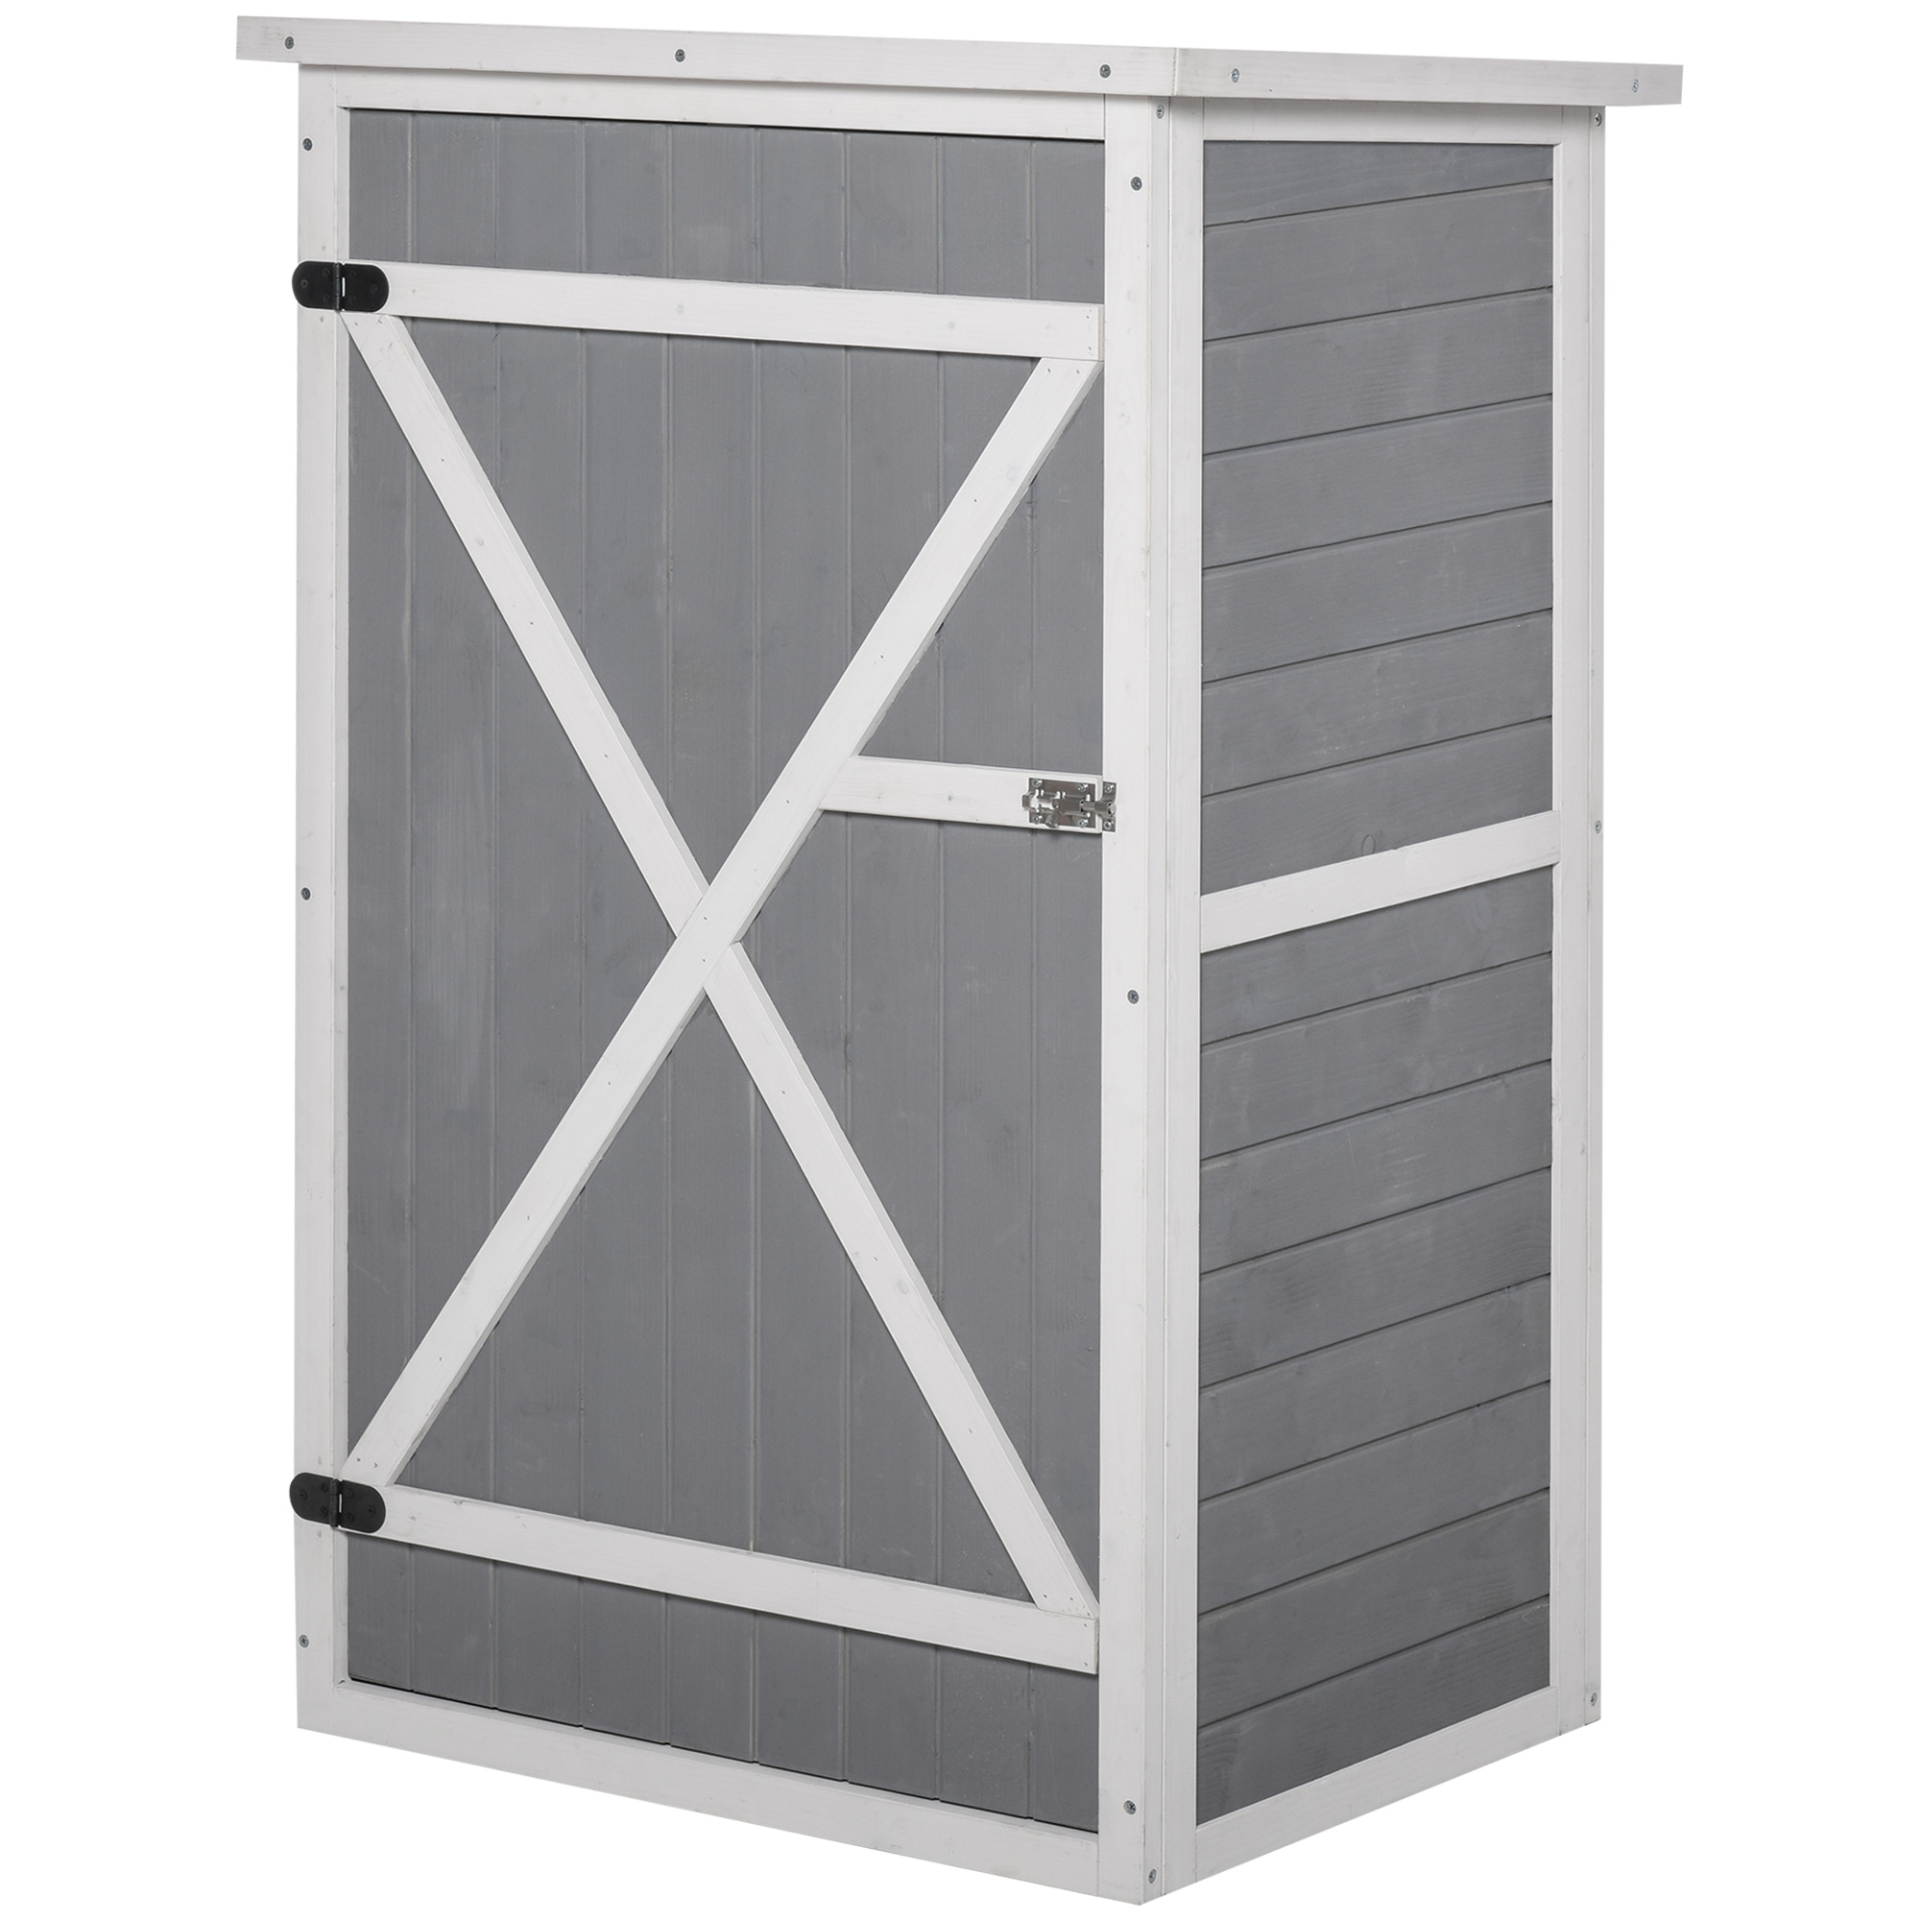 Grey Garden Shed Wooden Garden Storage Shed Fir Wood Tool Cabinet Organiser with